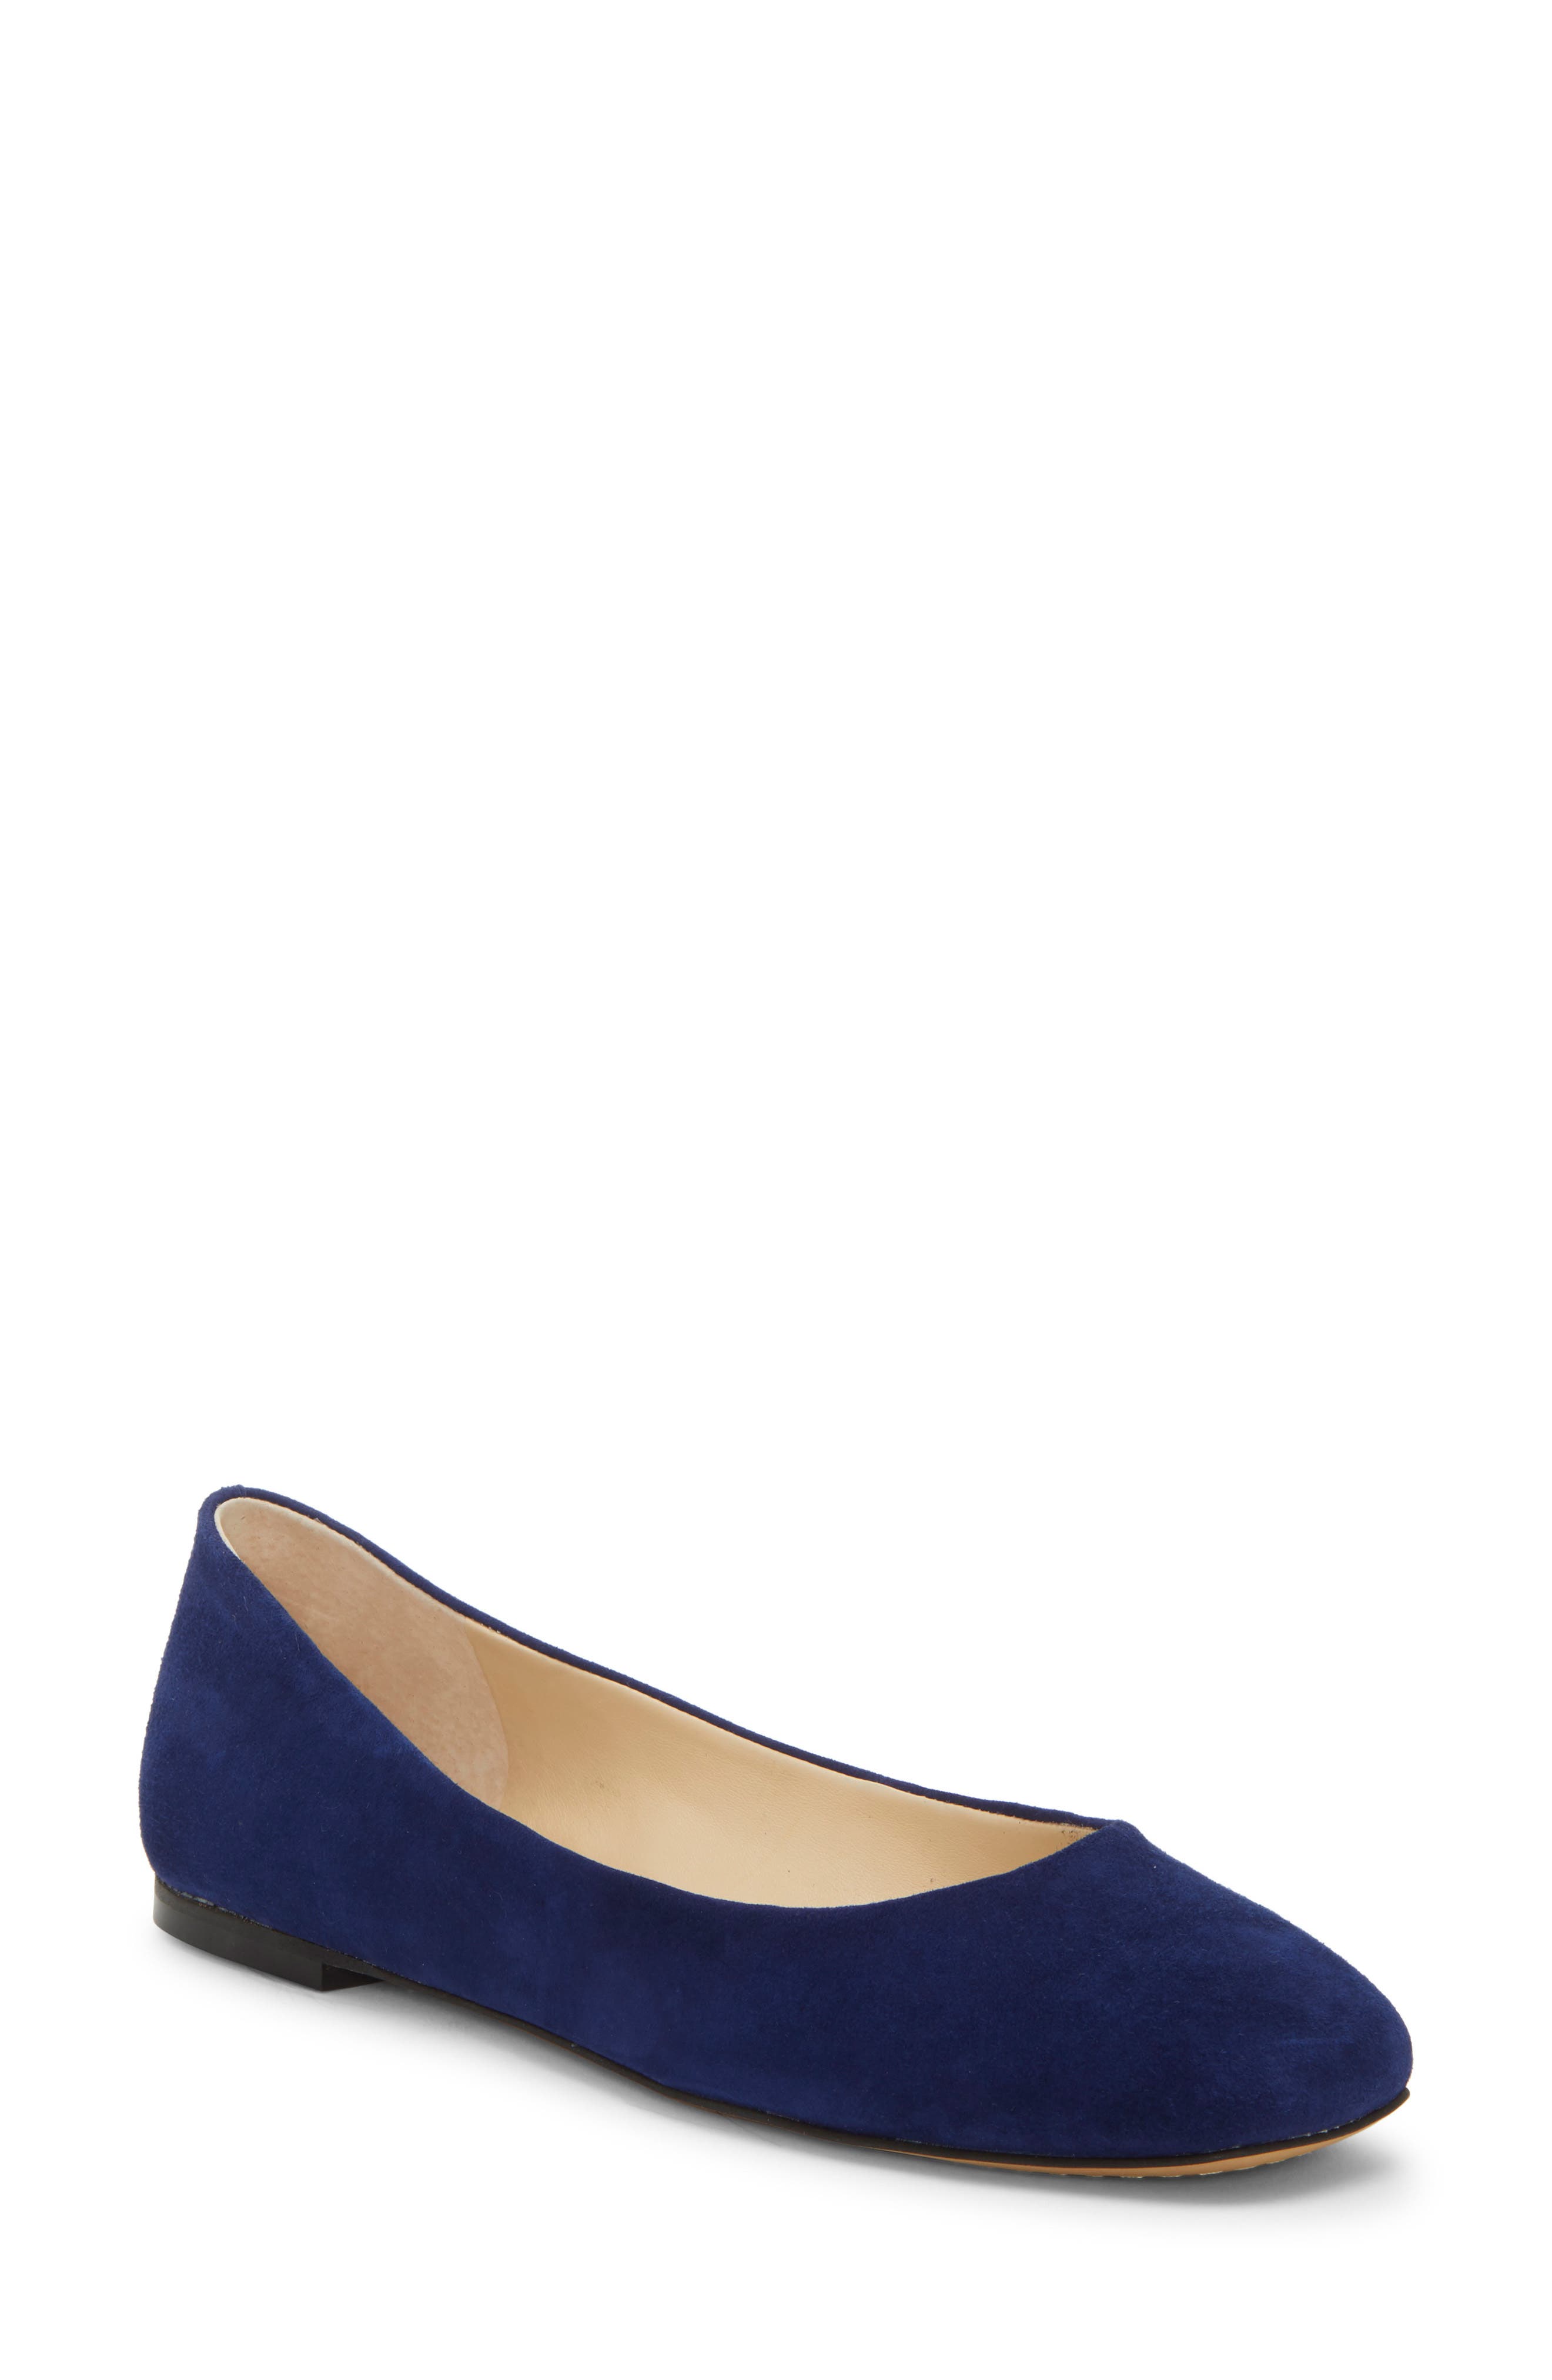 vince camuto suede flats